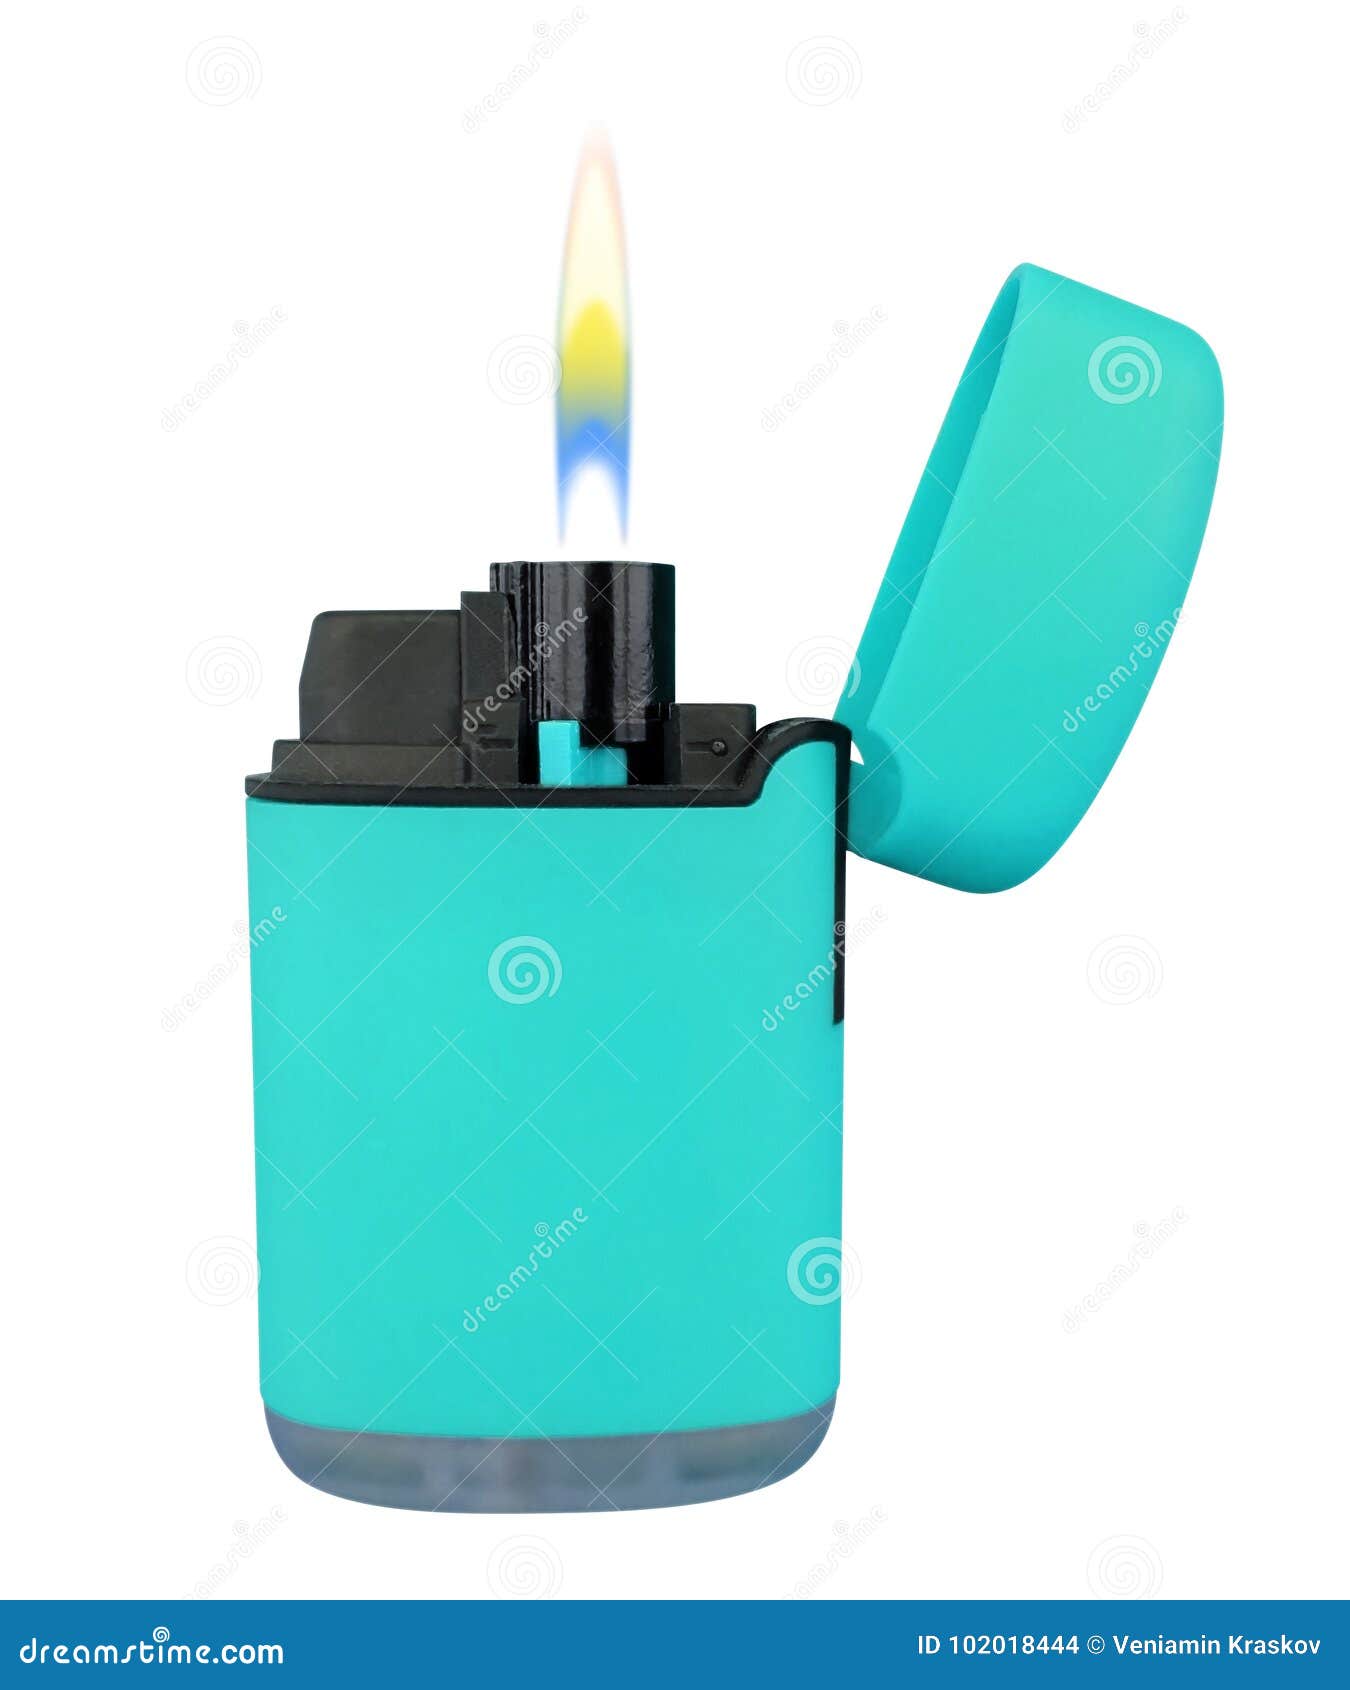 Plastic Gas Lighter with Light Blue Stock Photo of accessory, tobacco: 102018444